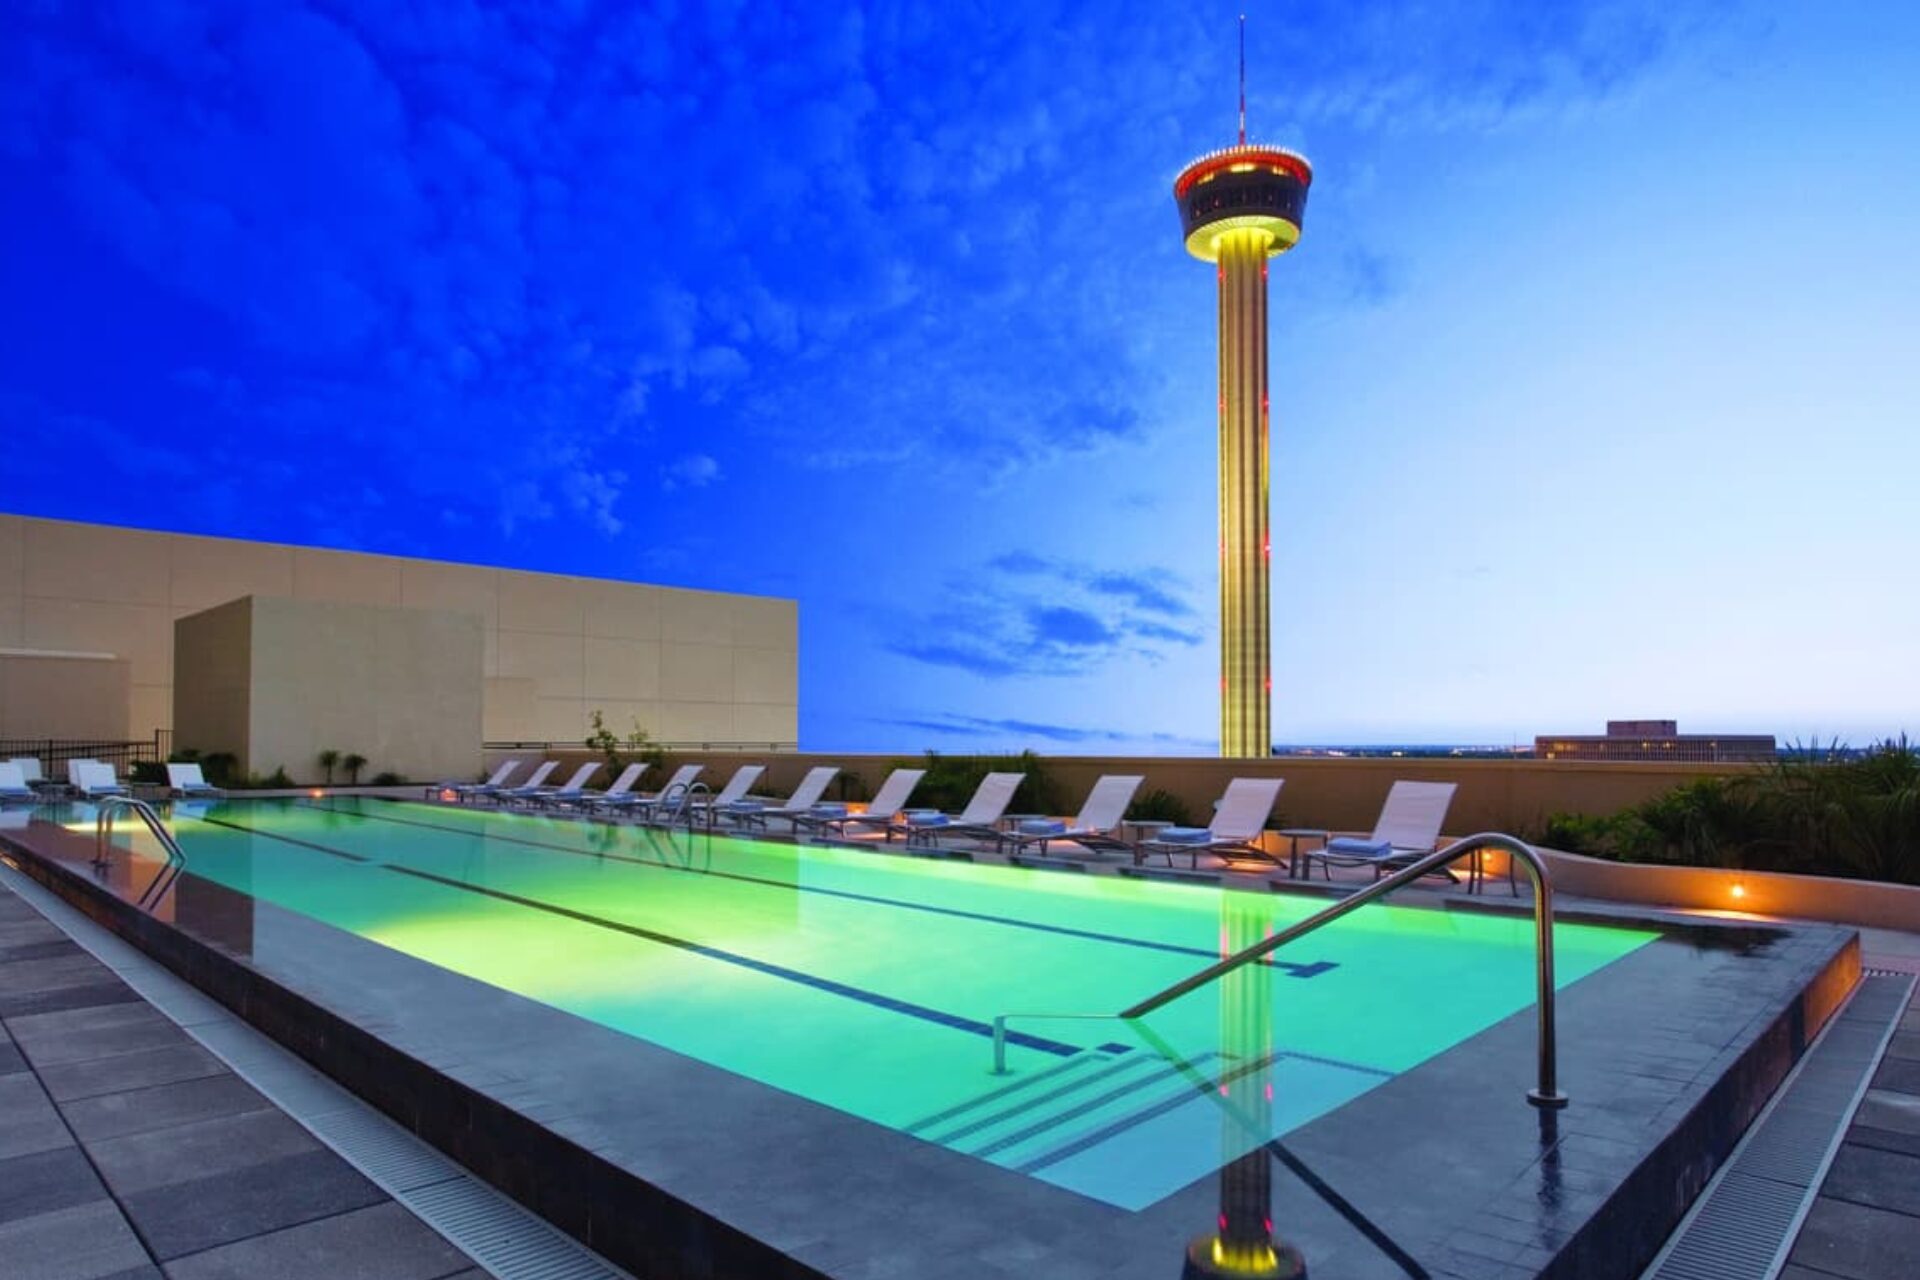 The outdoor pool at the San Antonio hotel